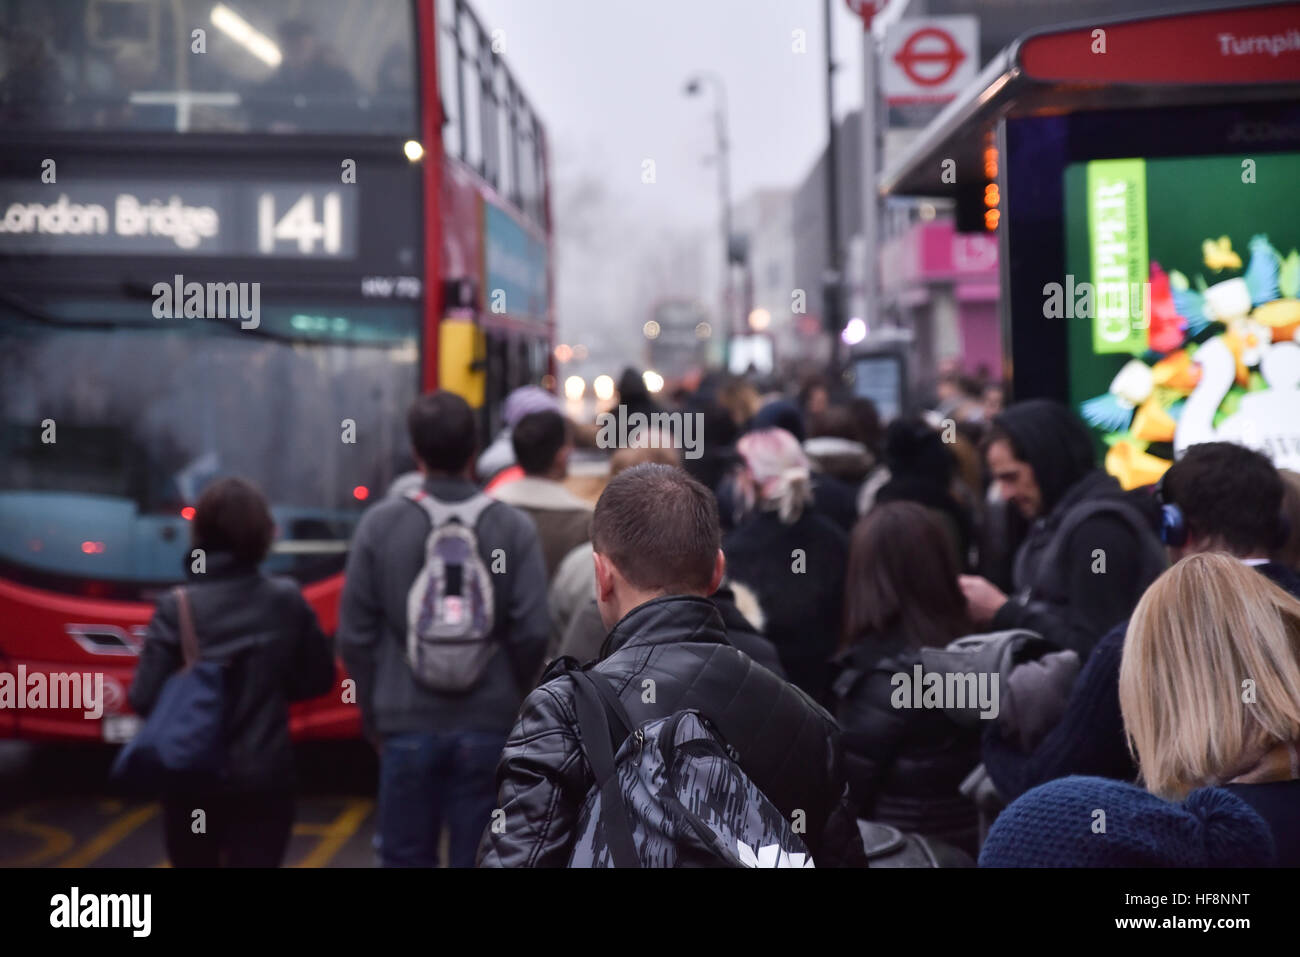 Turnpike Lane, London, UK. 30th December 2016. People queue for the buses at rush hour after the Piccadilly Line is cancelled Stock Photo